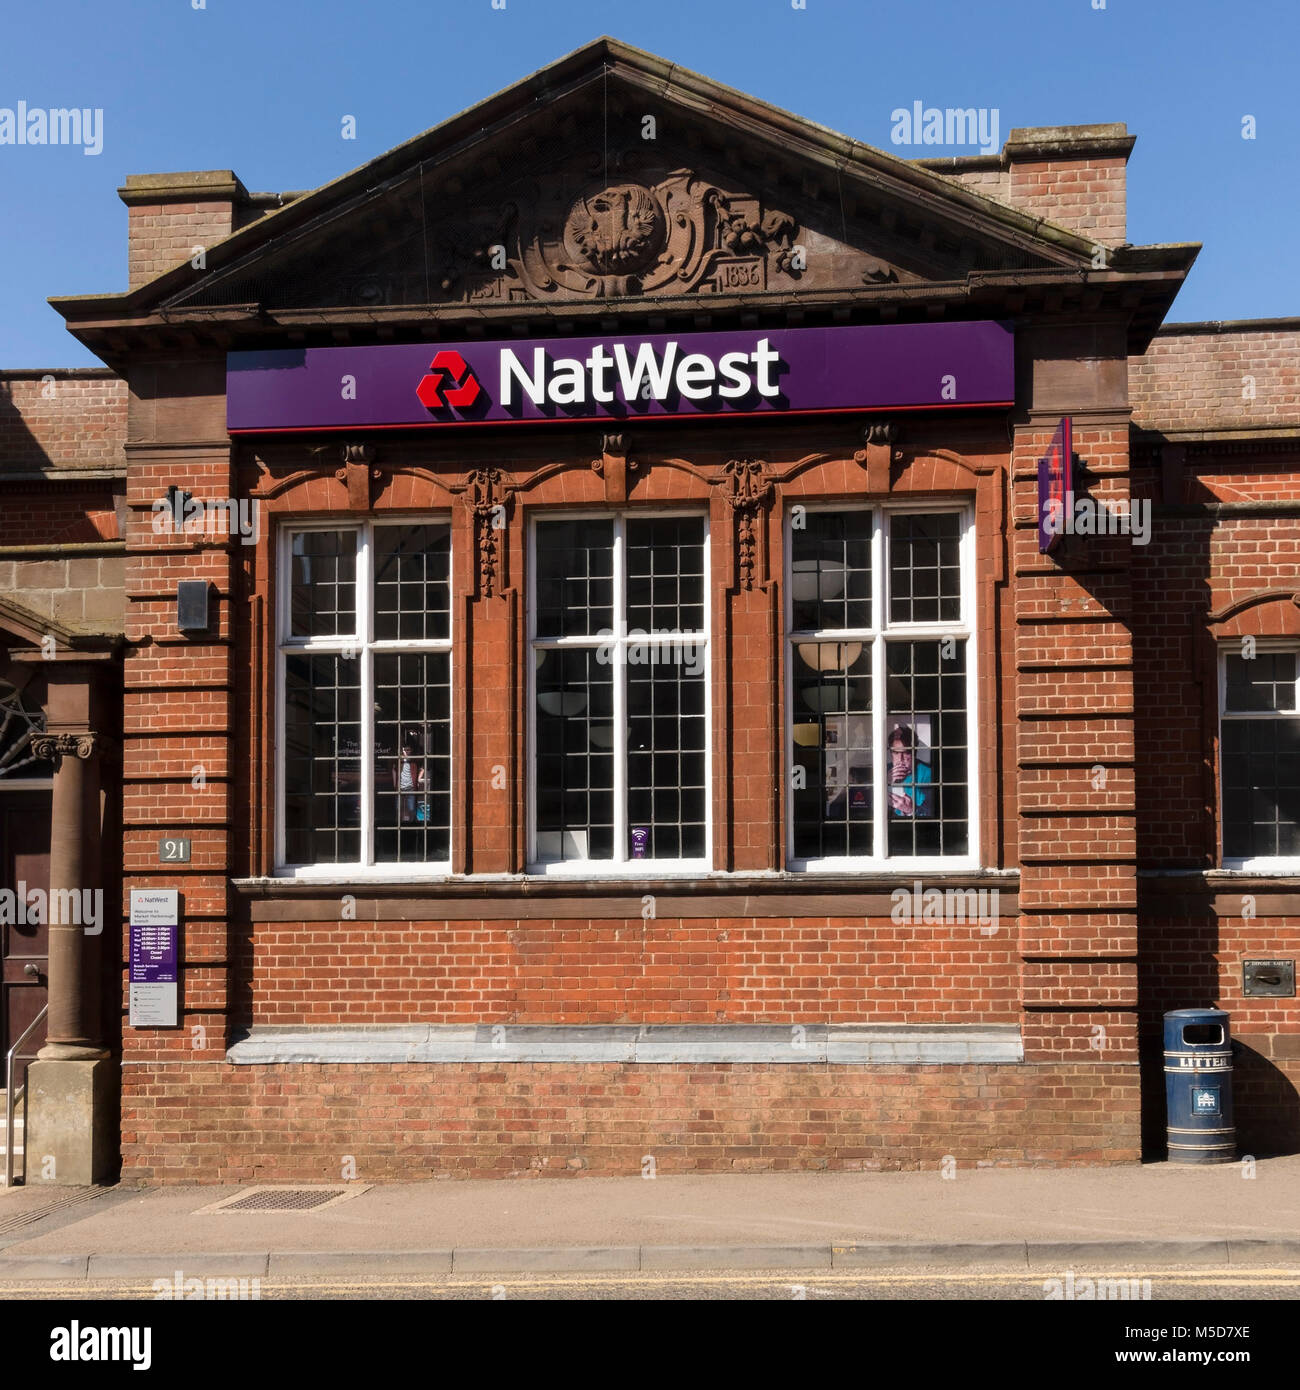 NatWest Bank, National Westminster Bank, old red brick traditional High Street Bank, Market Harborough, Leicestershire, England, UK Stock Photo